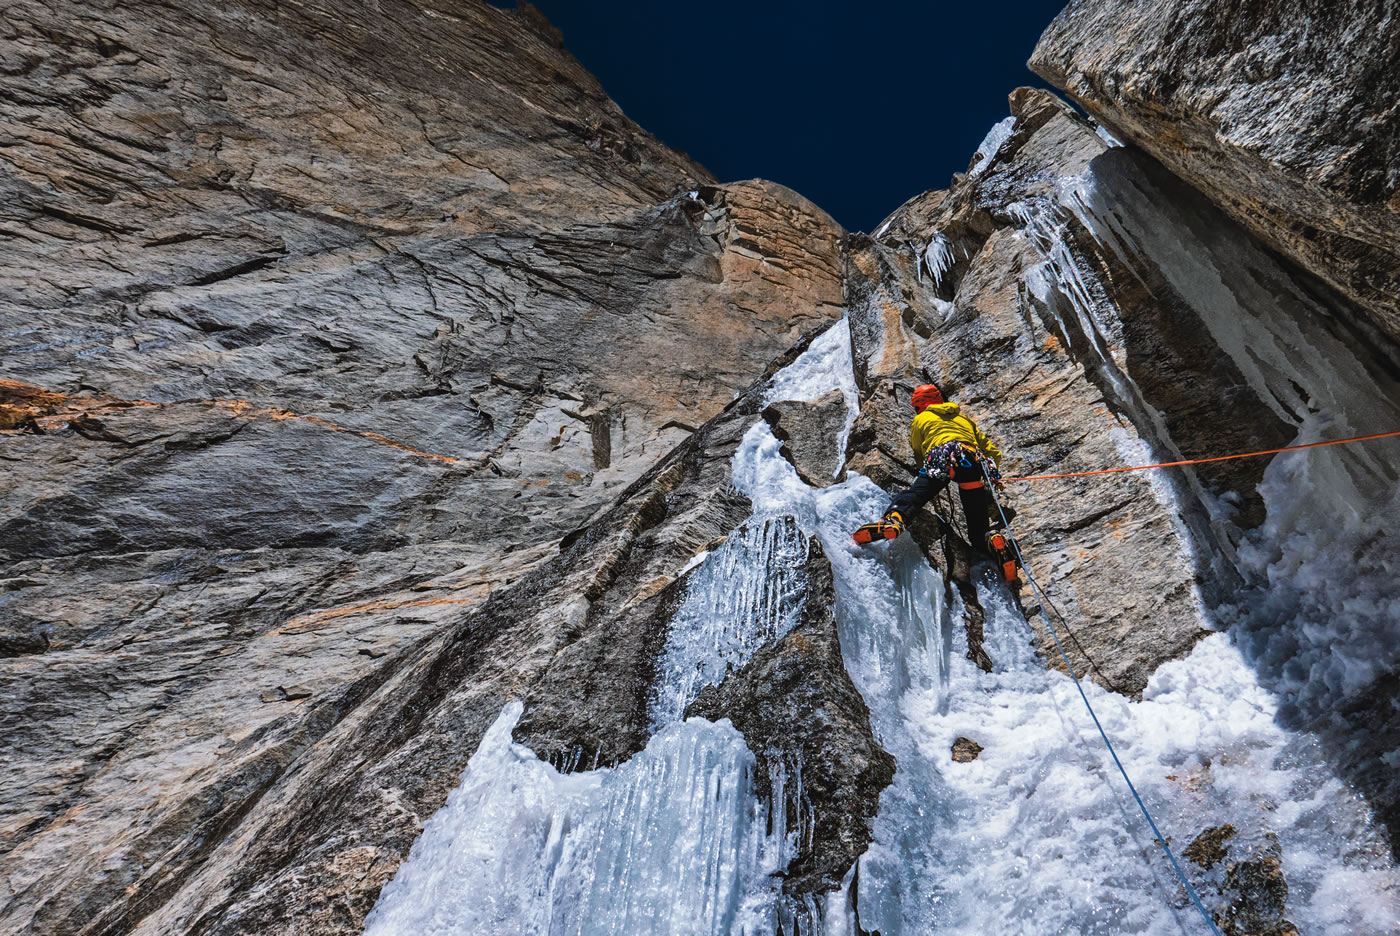 Pellissier on one of the increasingly slushy ice flows during the second day. Before Cerro Kishtwar, Prezelj, Kennedy and Novak had acclimatized by making the first ascent of the south ridge (D+, 1400m) of Chomochior (6278m). [Photo] Marko Prezelj